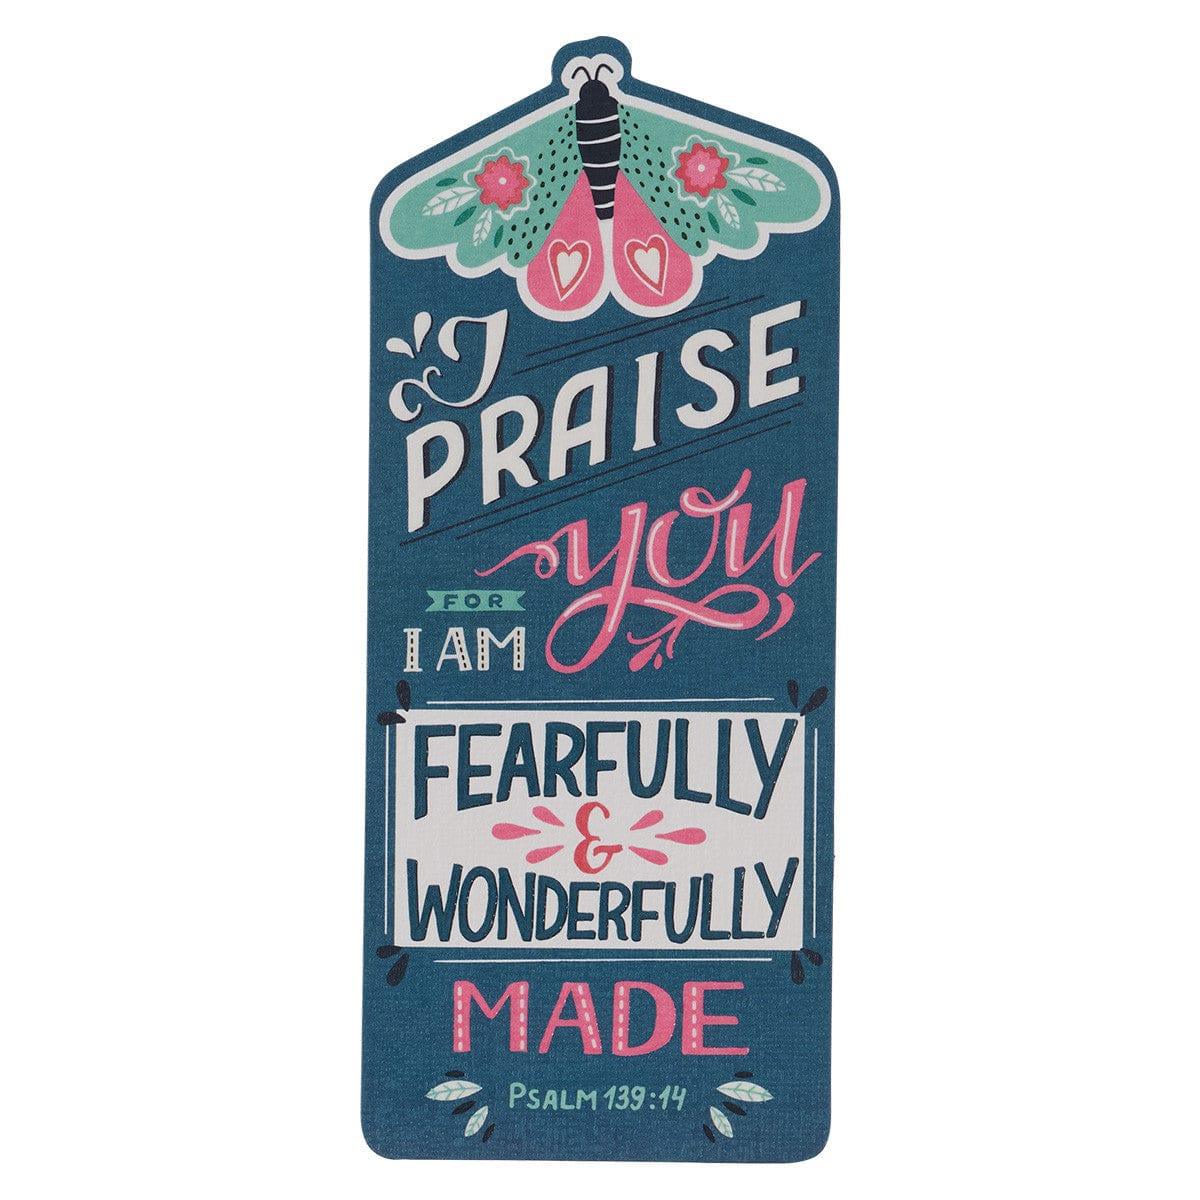 Fearfully and Wonderfully Made Butterfly Premium Cardstock Bookmark - Psalm 139:14 - Pura Vida Books